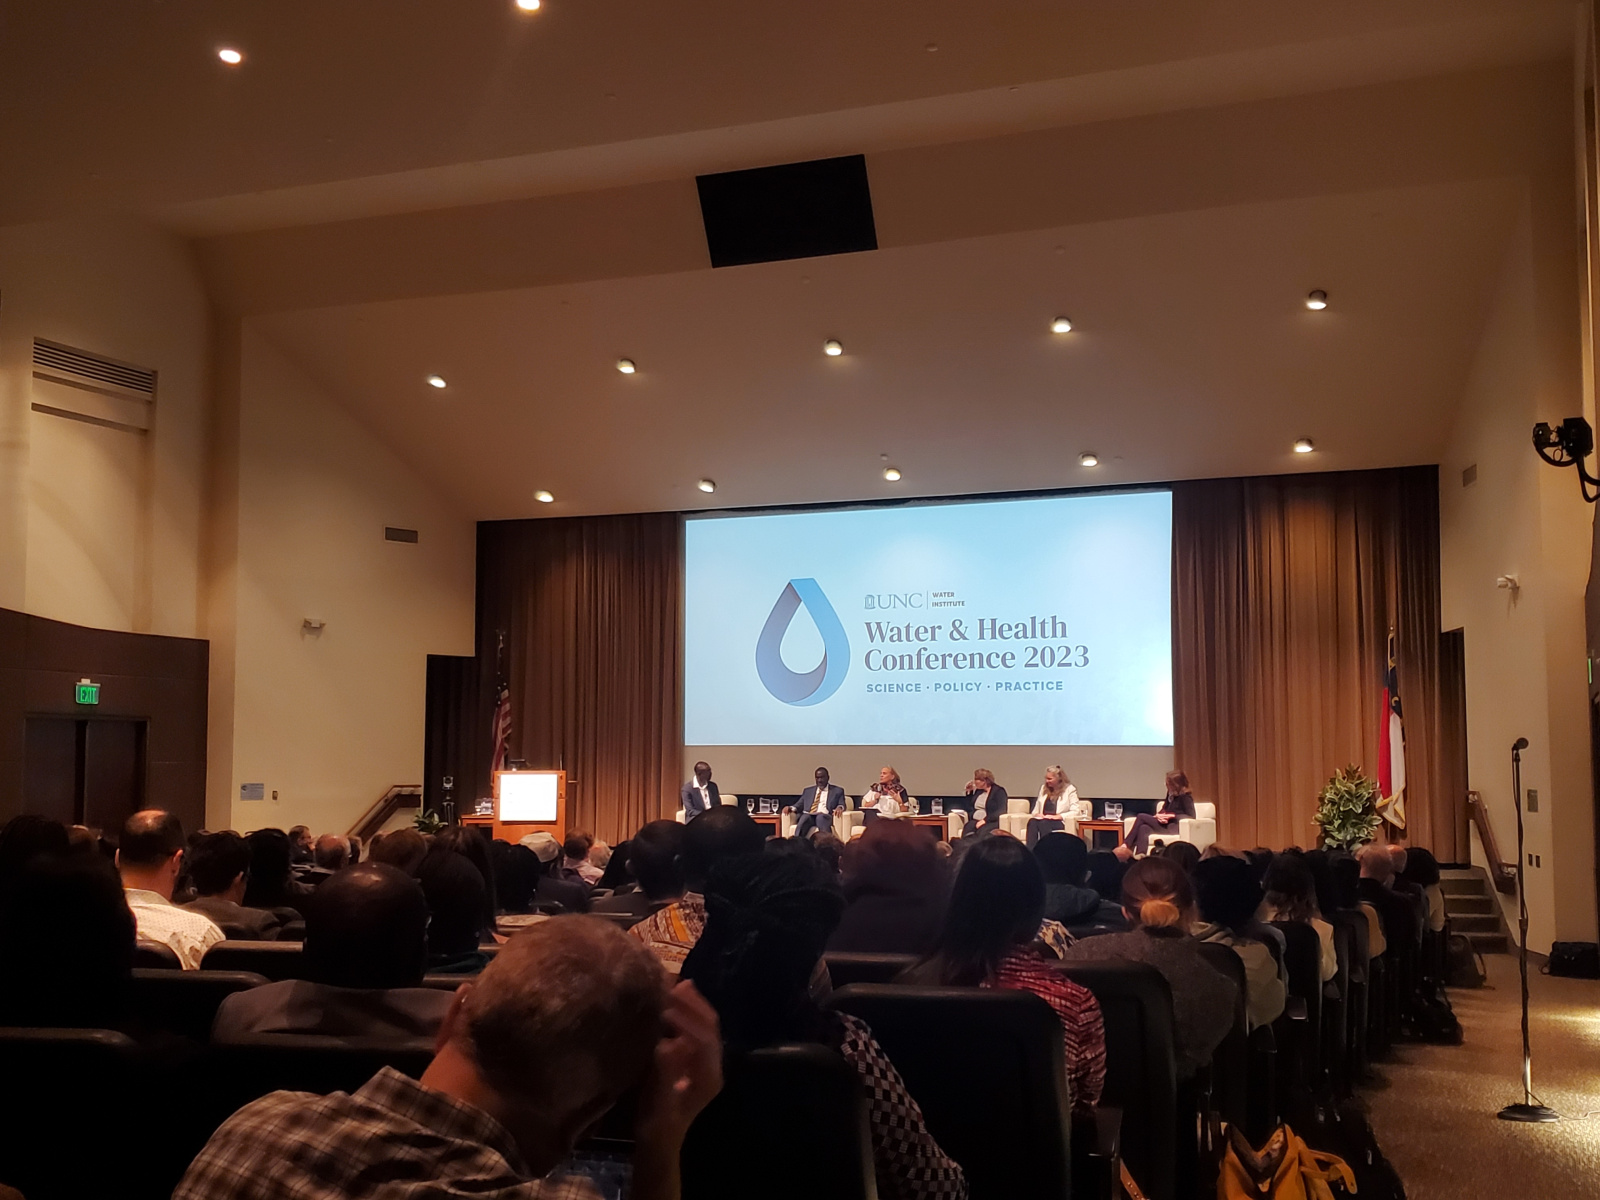 Six people sitting on a stage below a projector screen displaying the UNC Water & Health Conference logo.